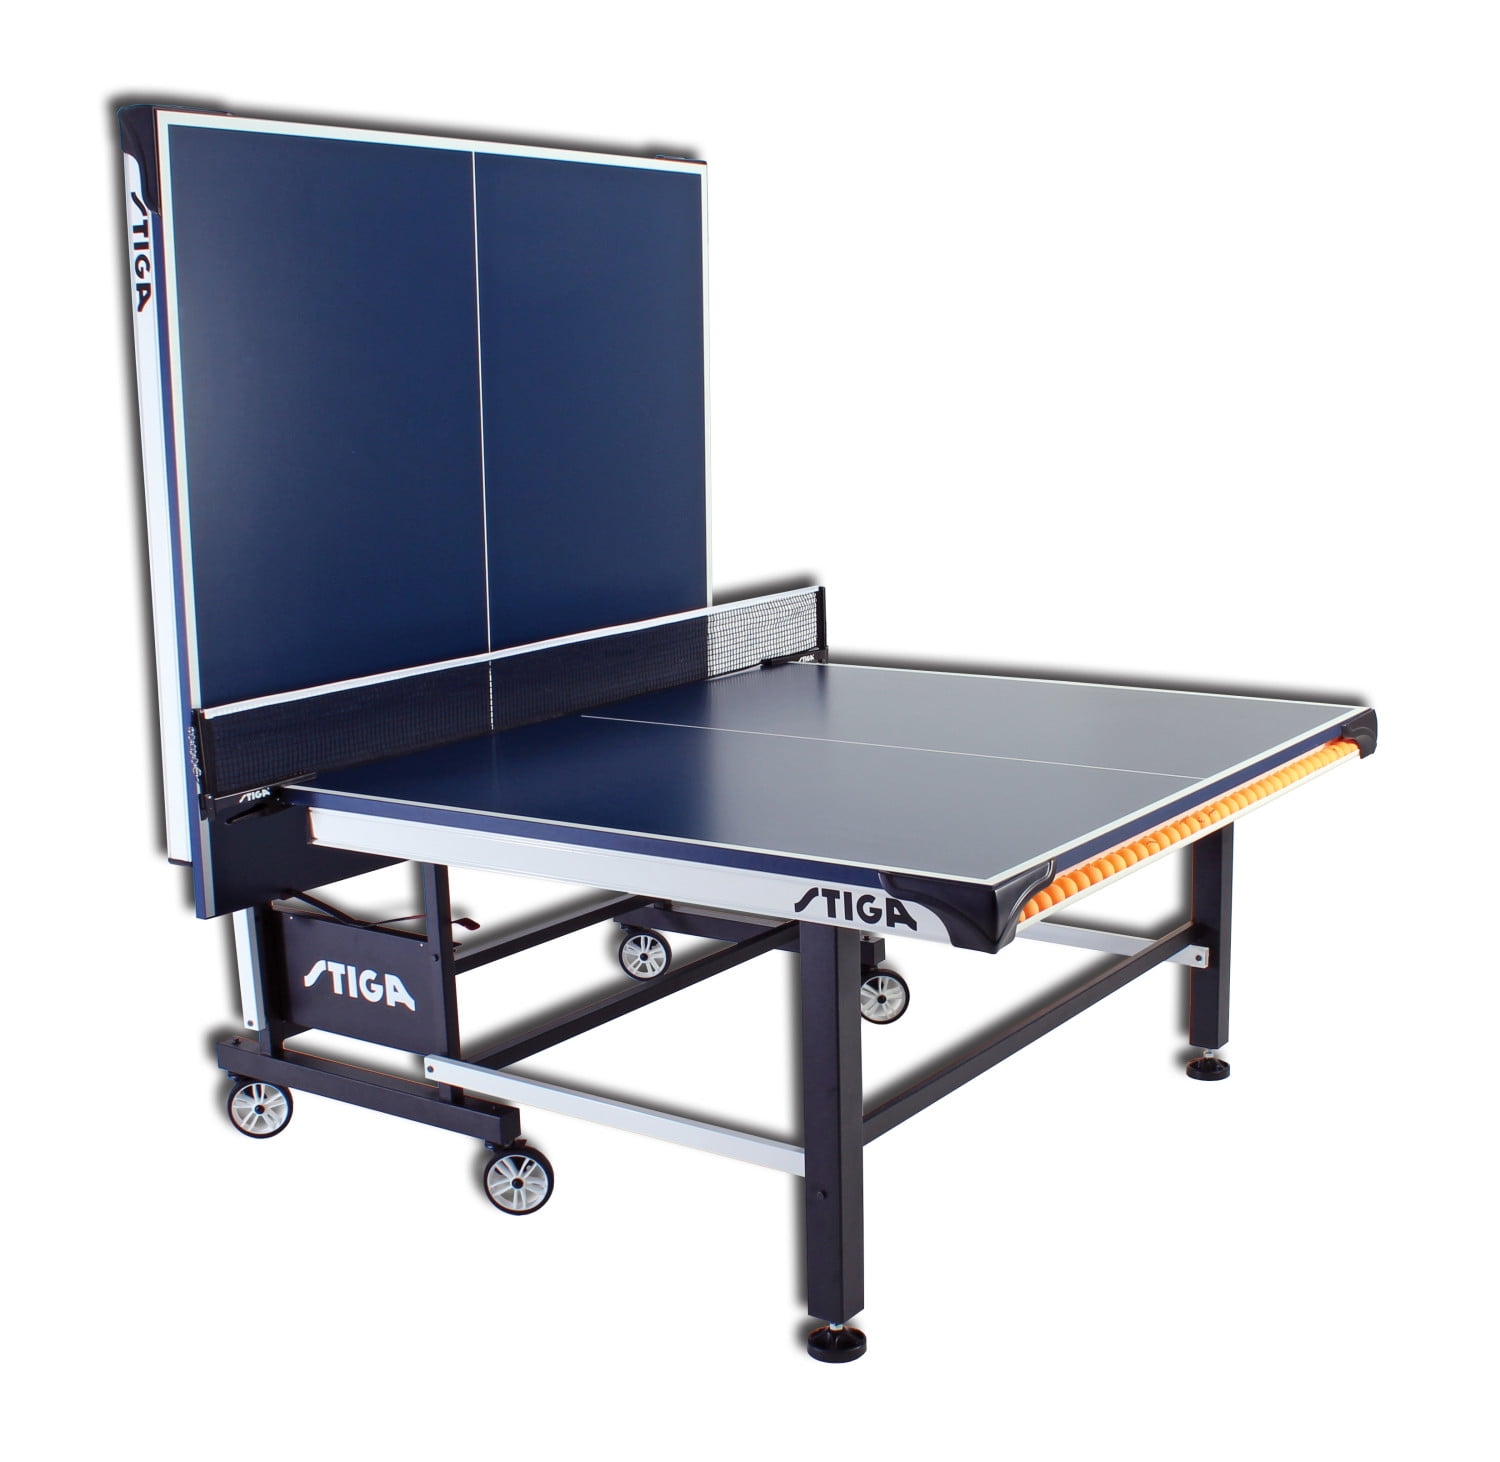 Stiga Privat Metal Table Tennis Net And Post Set Fast Ship ping pong 